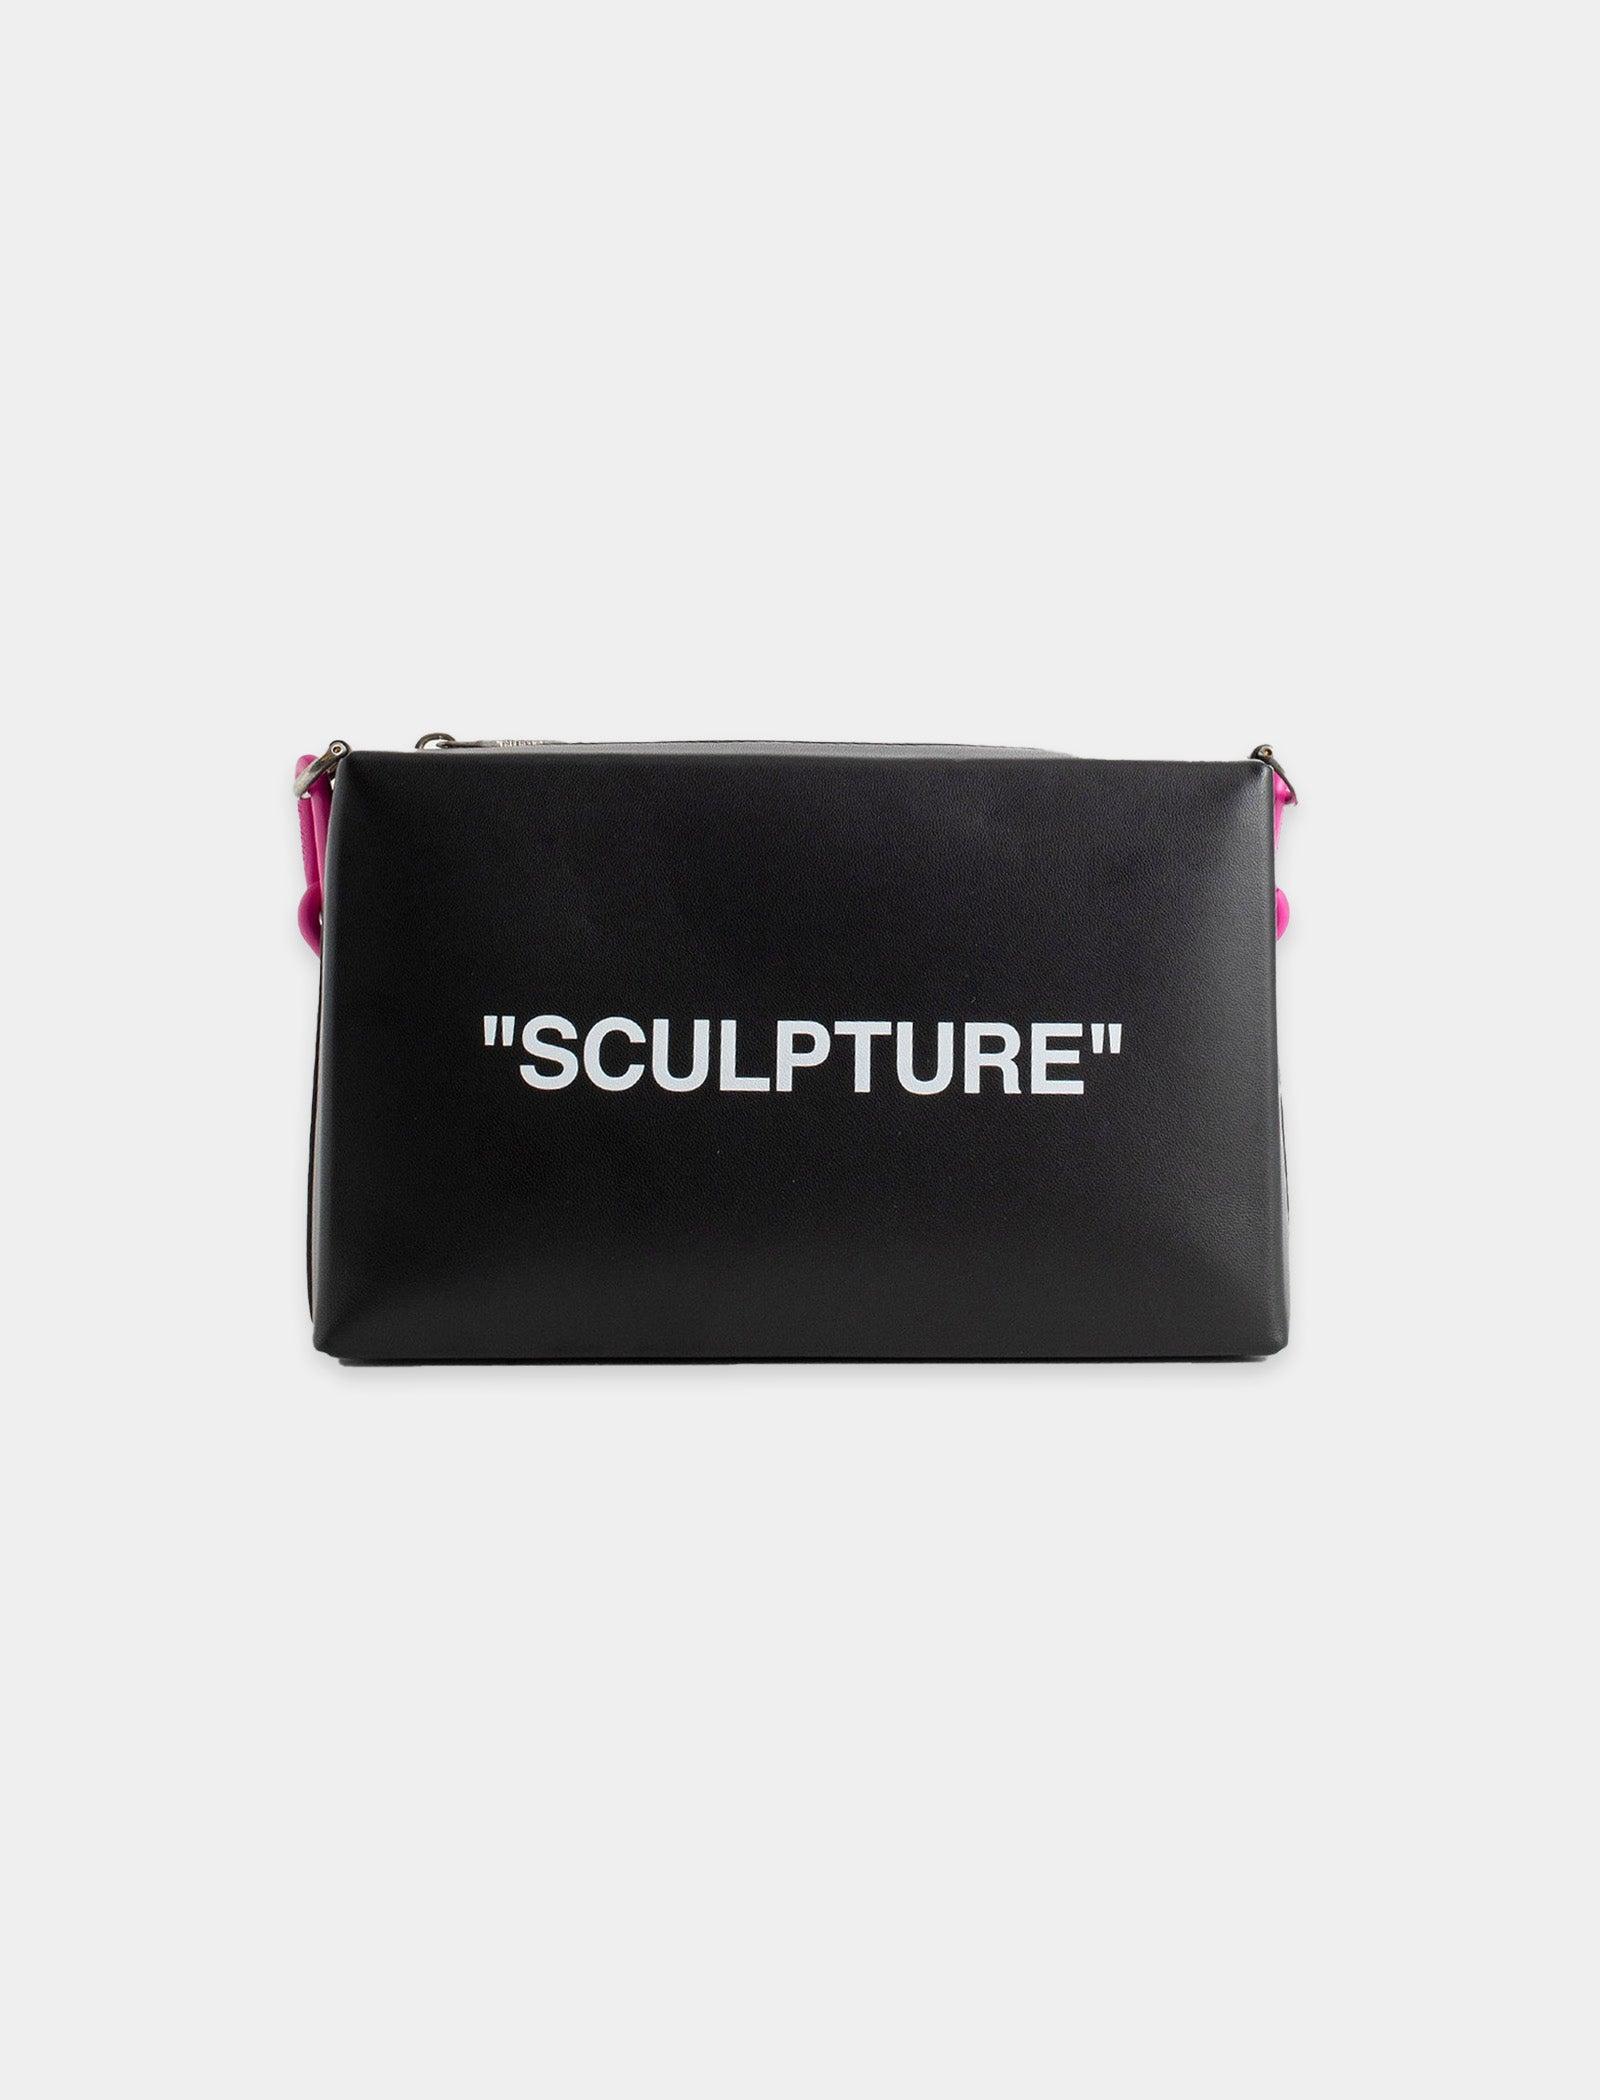 Off-White c/o Virgil Abloh Block Pouch Quote Bag in Black